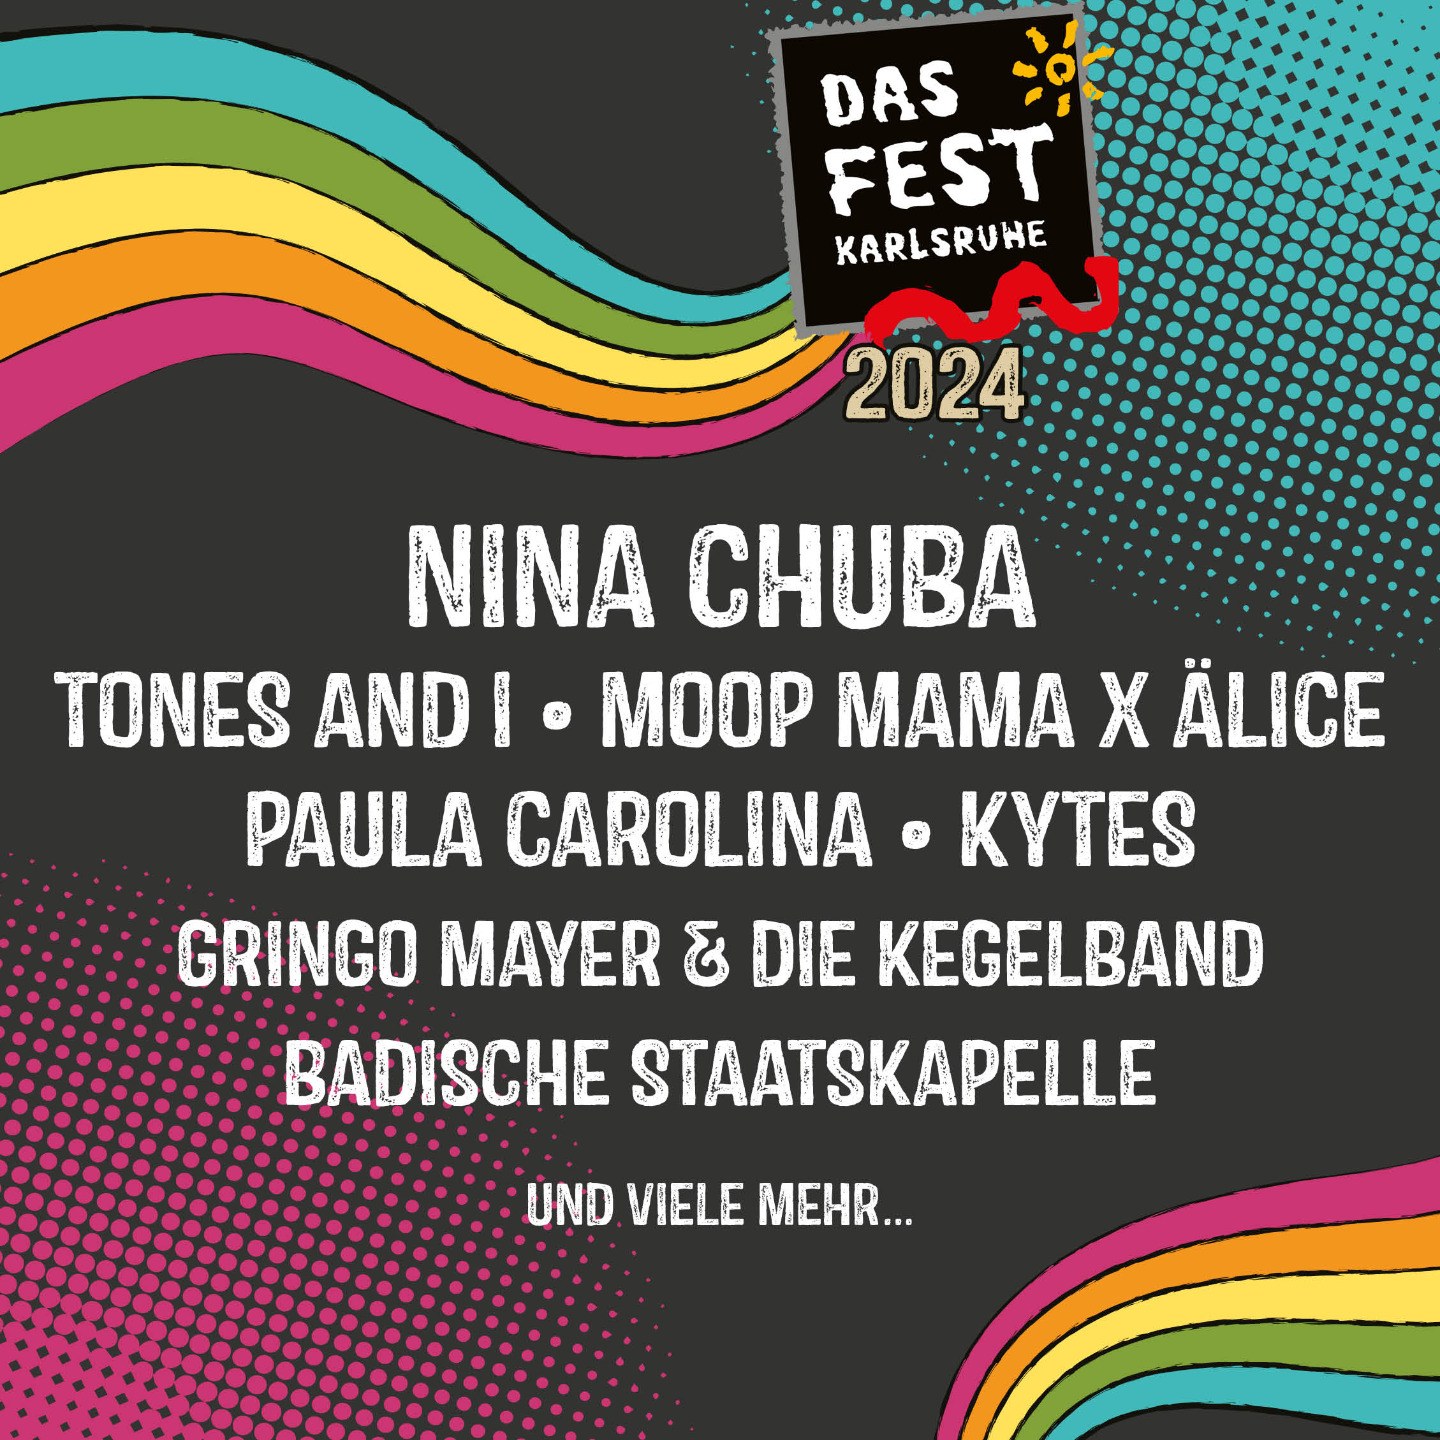 First acts for DAS FEST 2024 have been confirmed / Tickets on sale from 6 December image